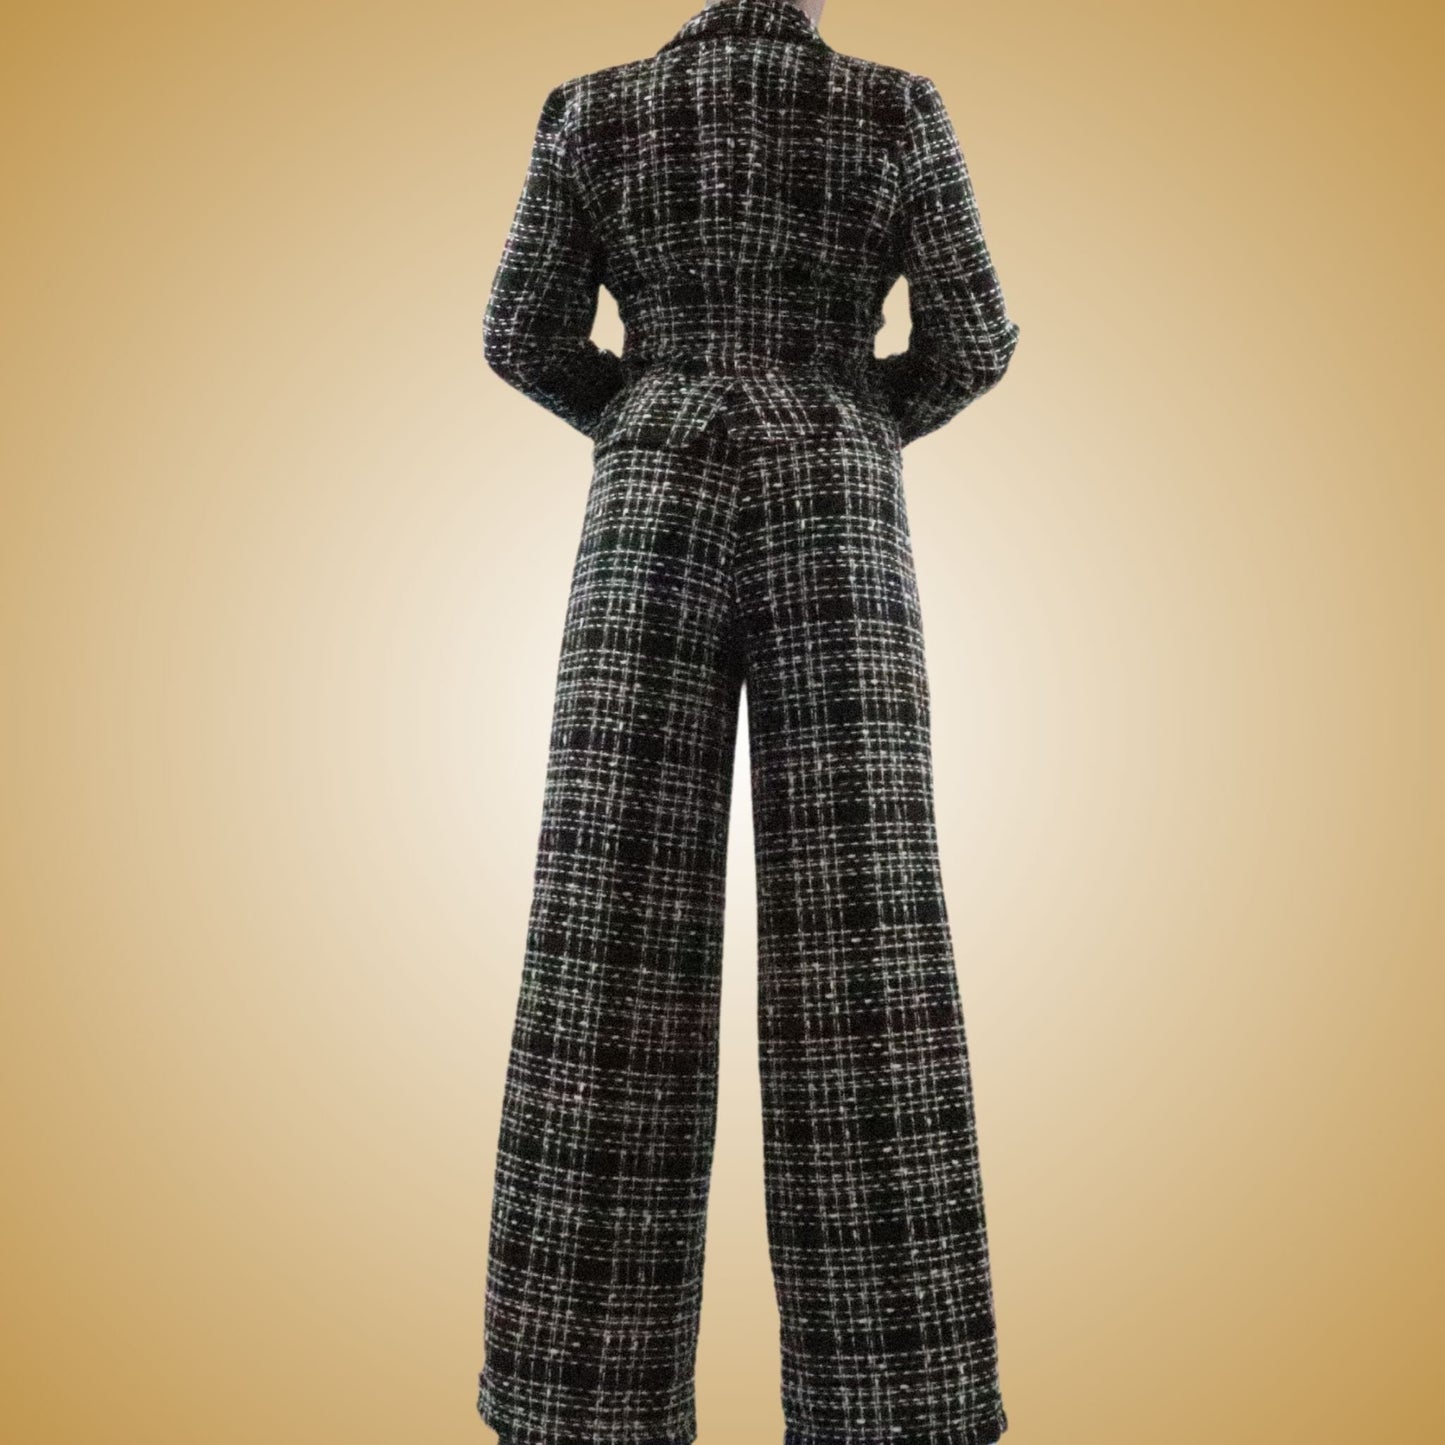 Issa Tweed Woman's Pants Suit Sets Mo'Nique Couture Fashions 